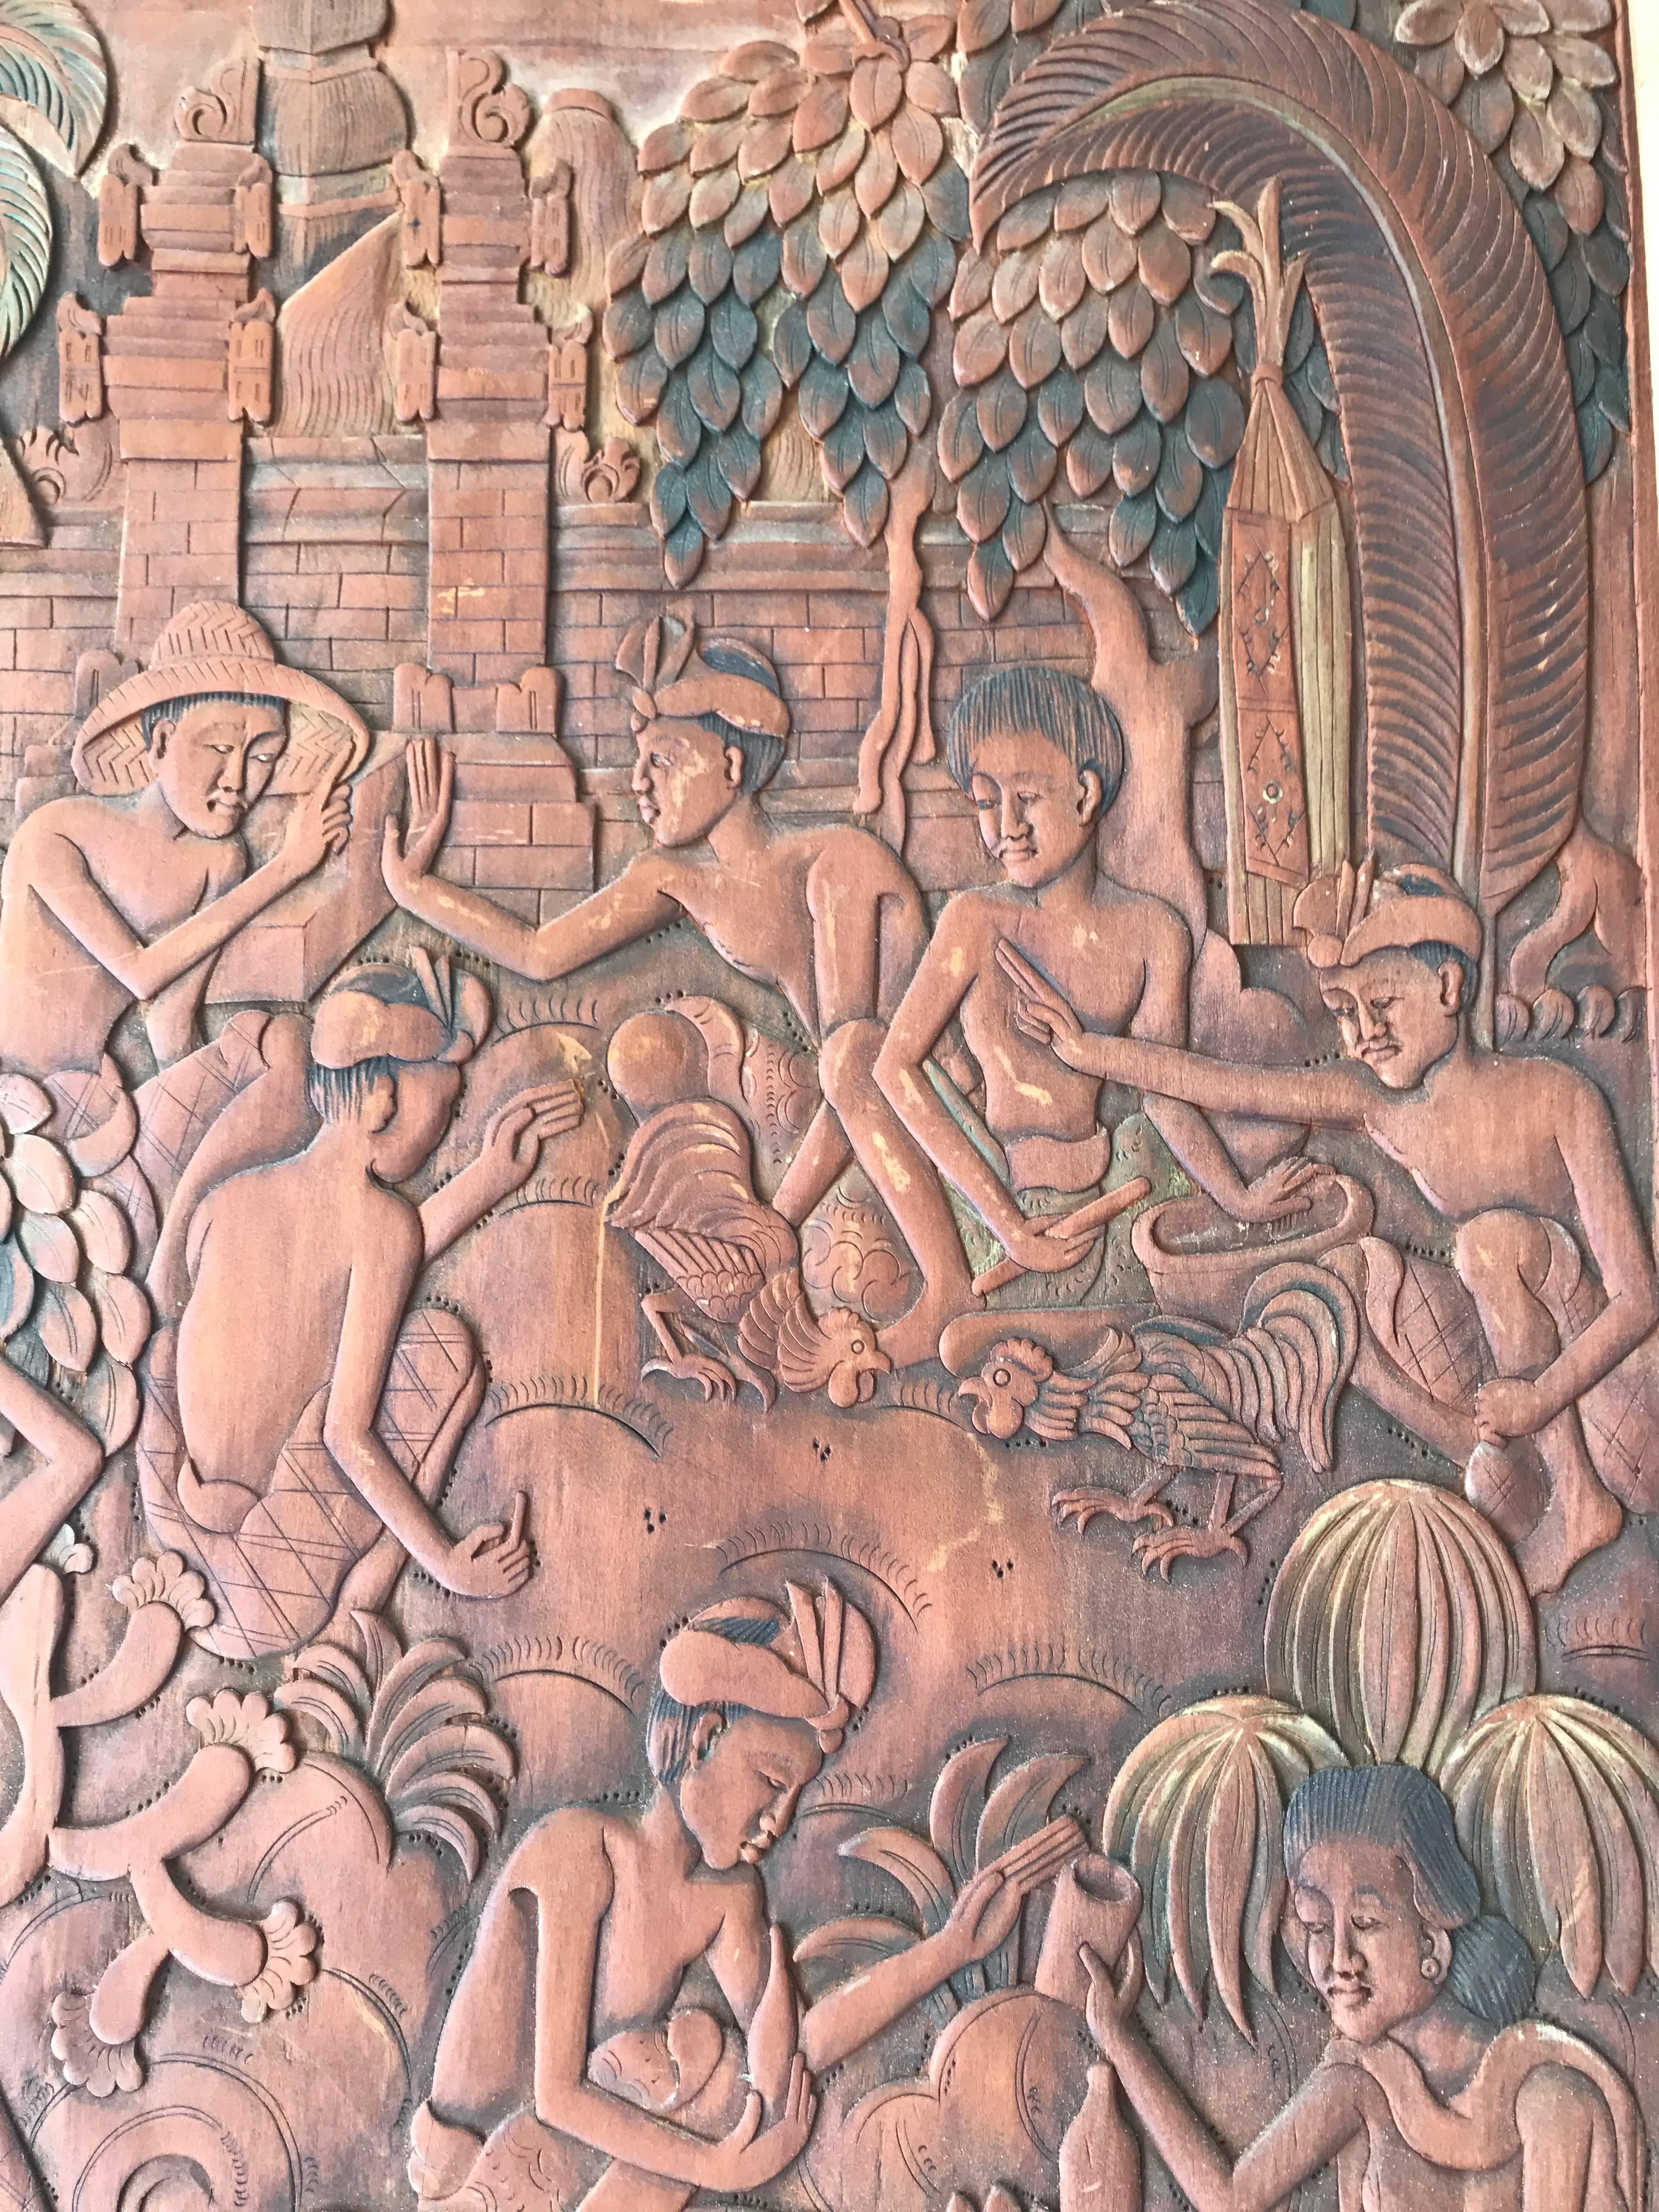 Indonesian Balinese, Batuan Hand Carved Cockfight Painting Sculpture by Ida Bagus Made Raka For Sale